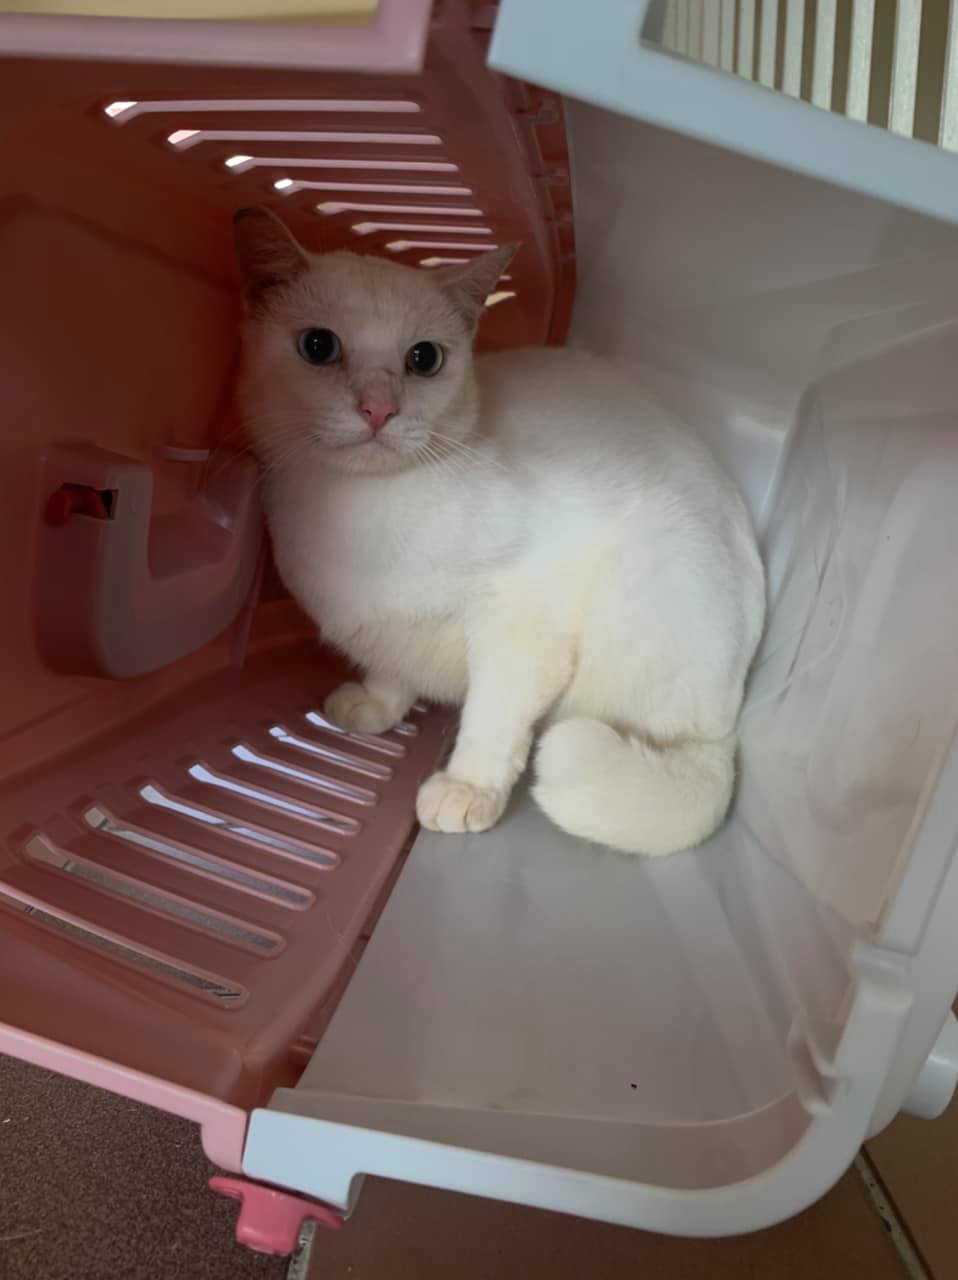 Cat Allegedly Abandoned In Broken Carrier At HDB Lift Lobby, Woman